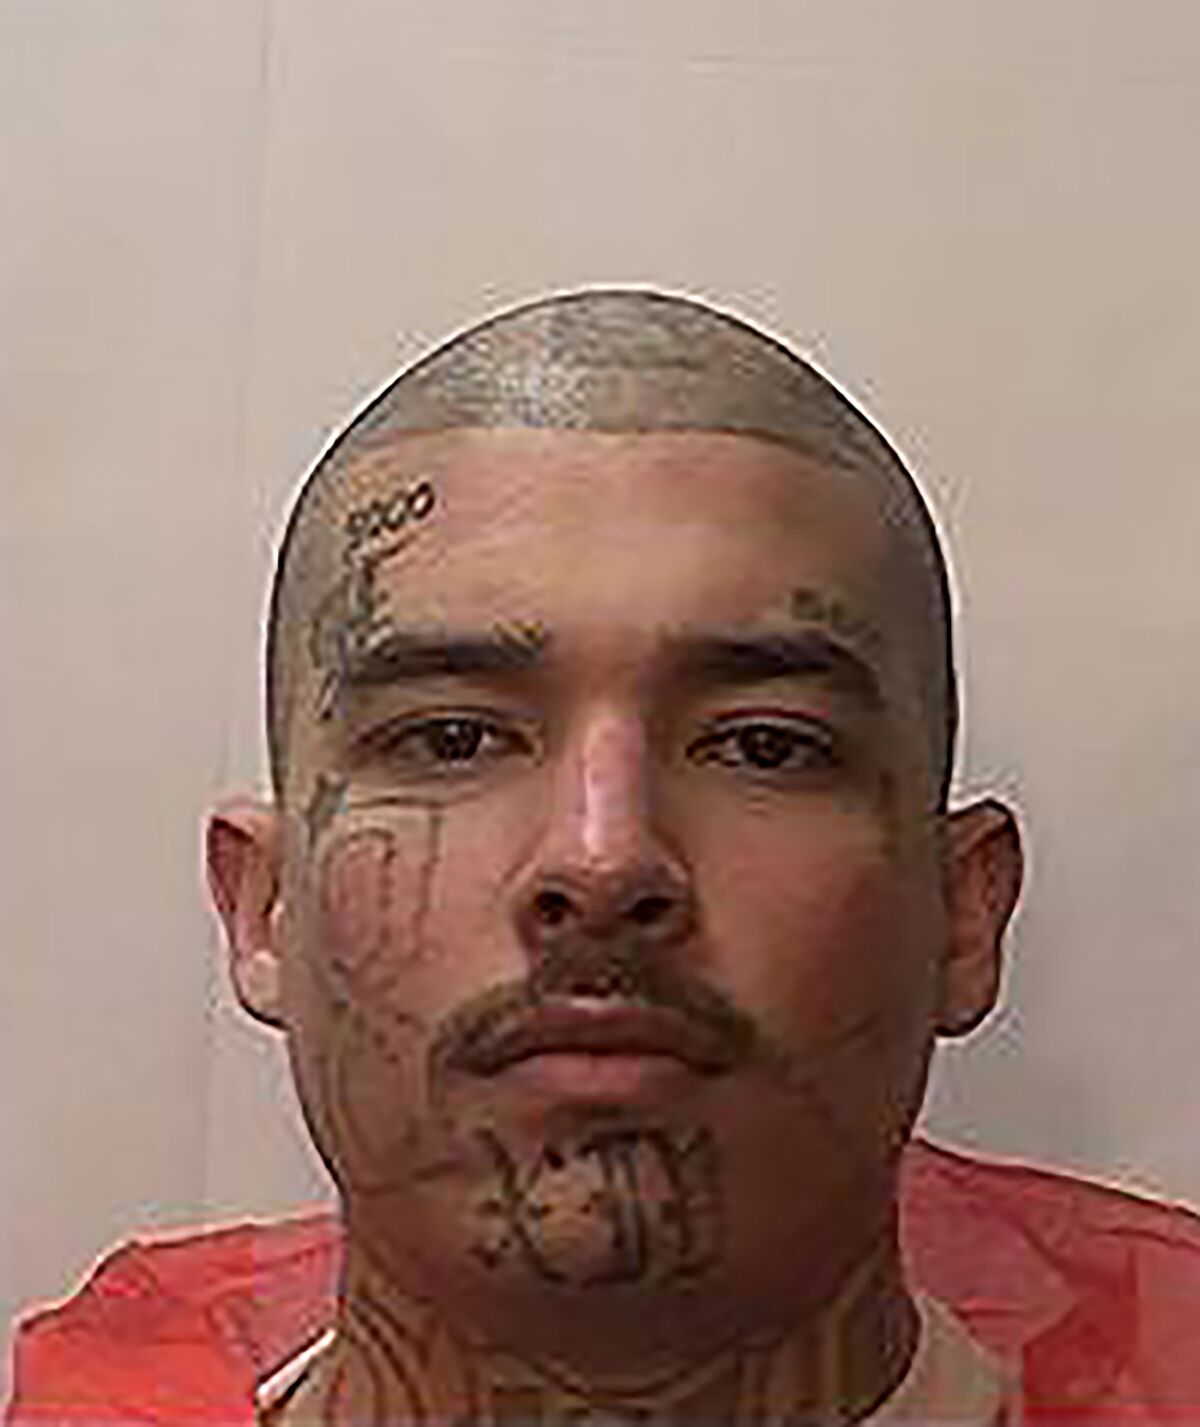 This Oct. 26, 2021, photo provided by the California Department of Corrections and Rehabilitation shows Fernando Torres Lopez. Lopez, who is serving a 19-year, eight-month sentence for various charges including attempted second-degree murder, allegedly attacked fellow inmate Uriel Otero, in the dayroom at Pelican Bay State Prison, on July 29, 2022. Otero died later that day from his wounds. (California Department of Corrections and Rehabilitation via AP)